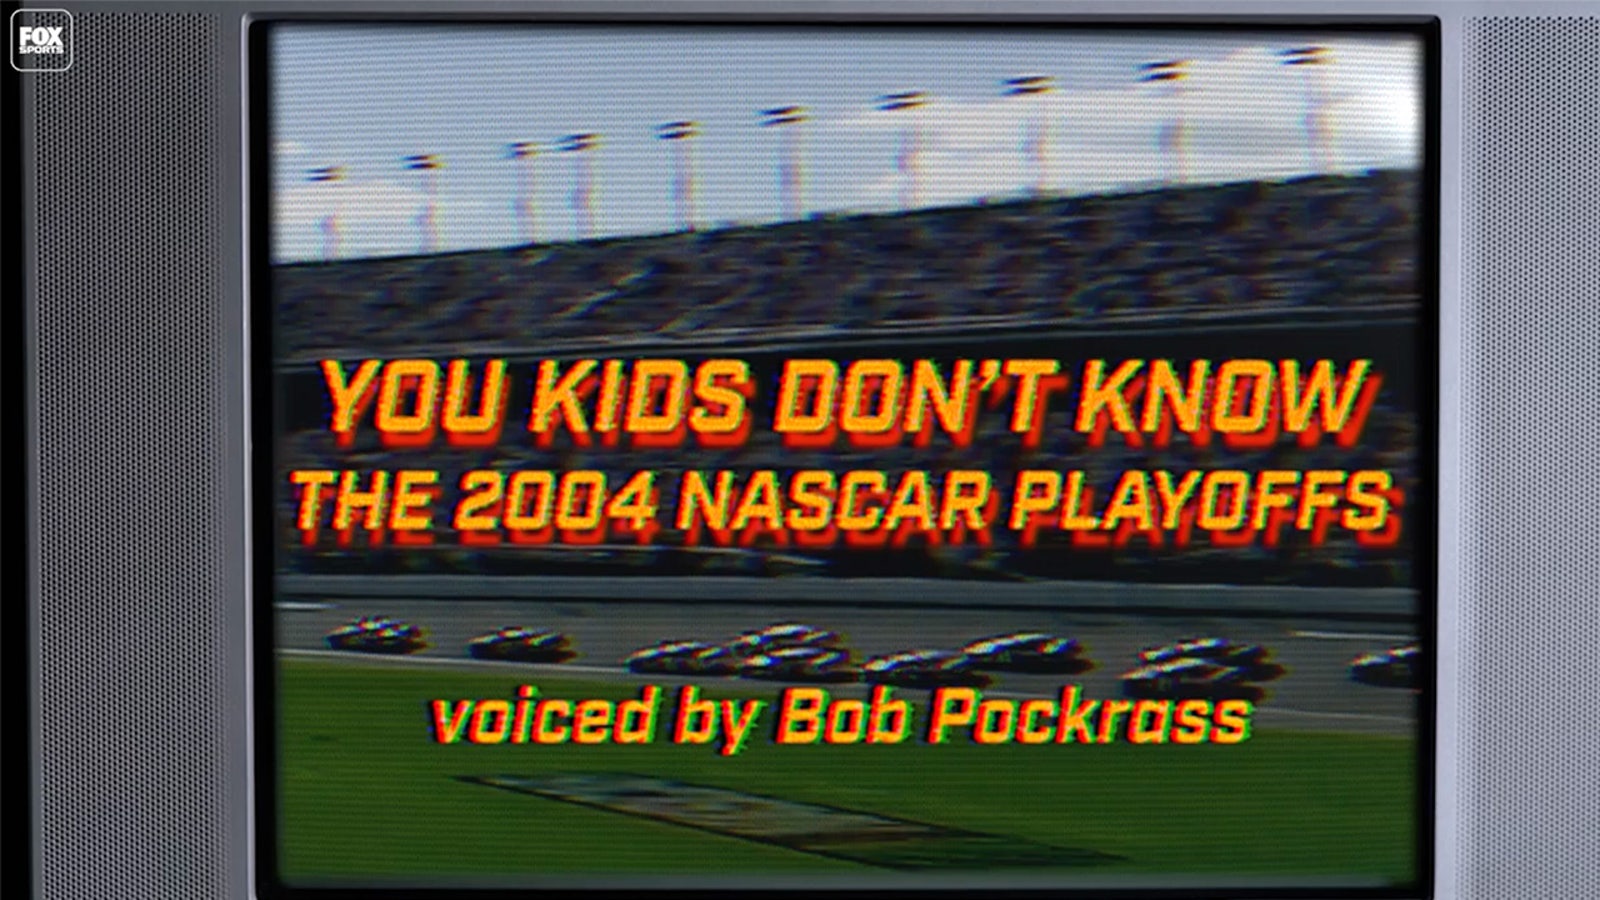 In the latest edition of our "You Kids Don’t Know" series, we take a look back at the first "Chase" playoffs in 2004